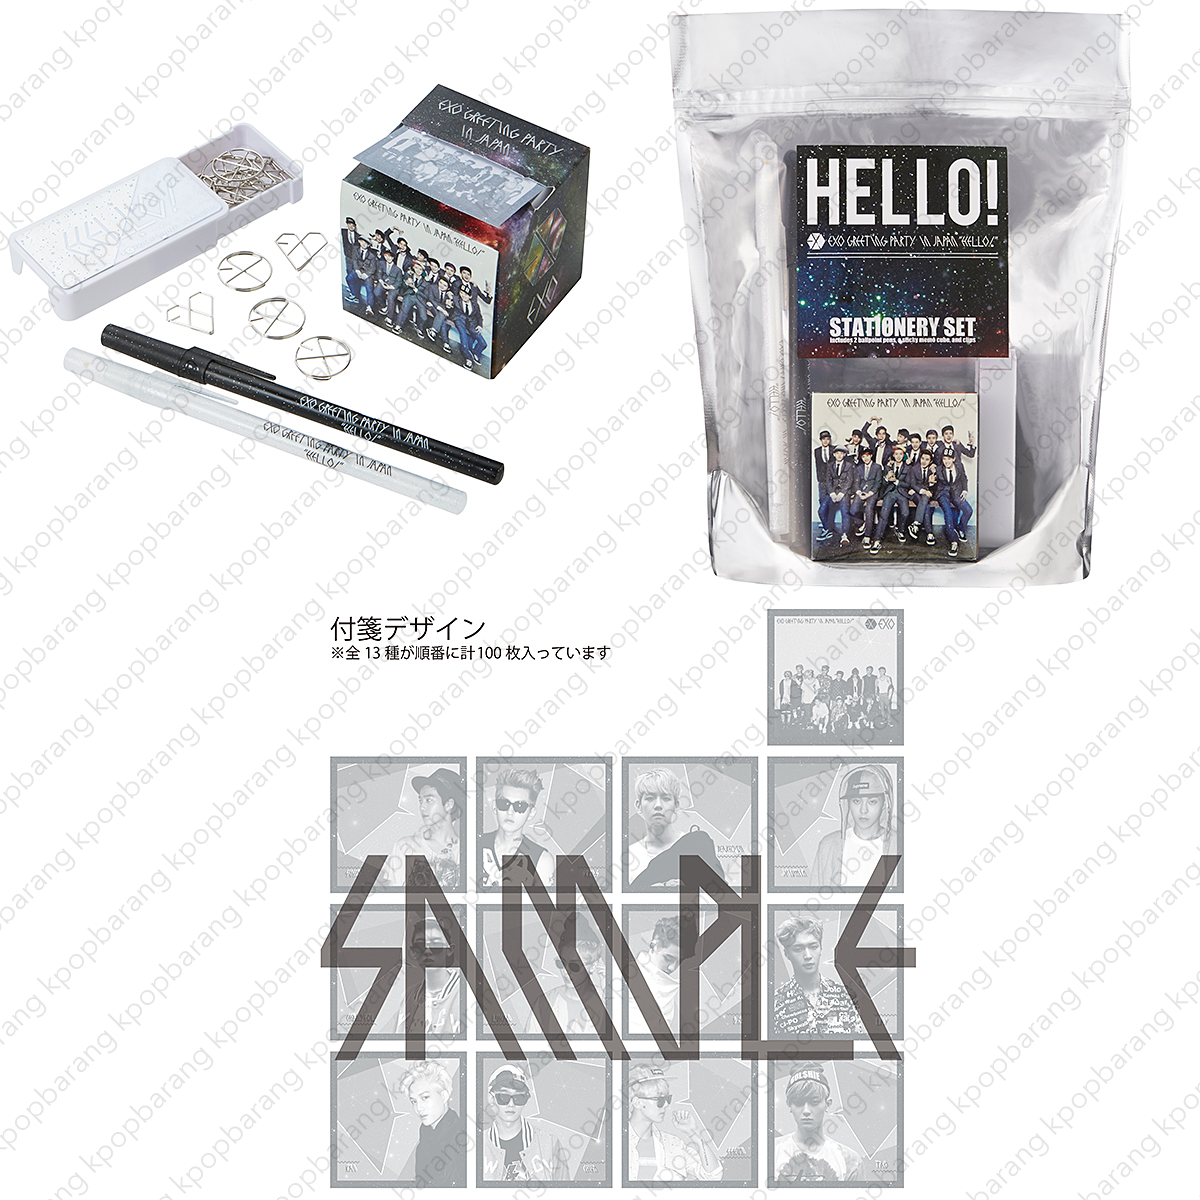 Pre-Order] EXO Greeting Party in Japan “Hello!” Official Goods